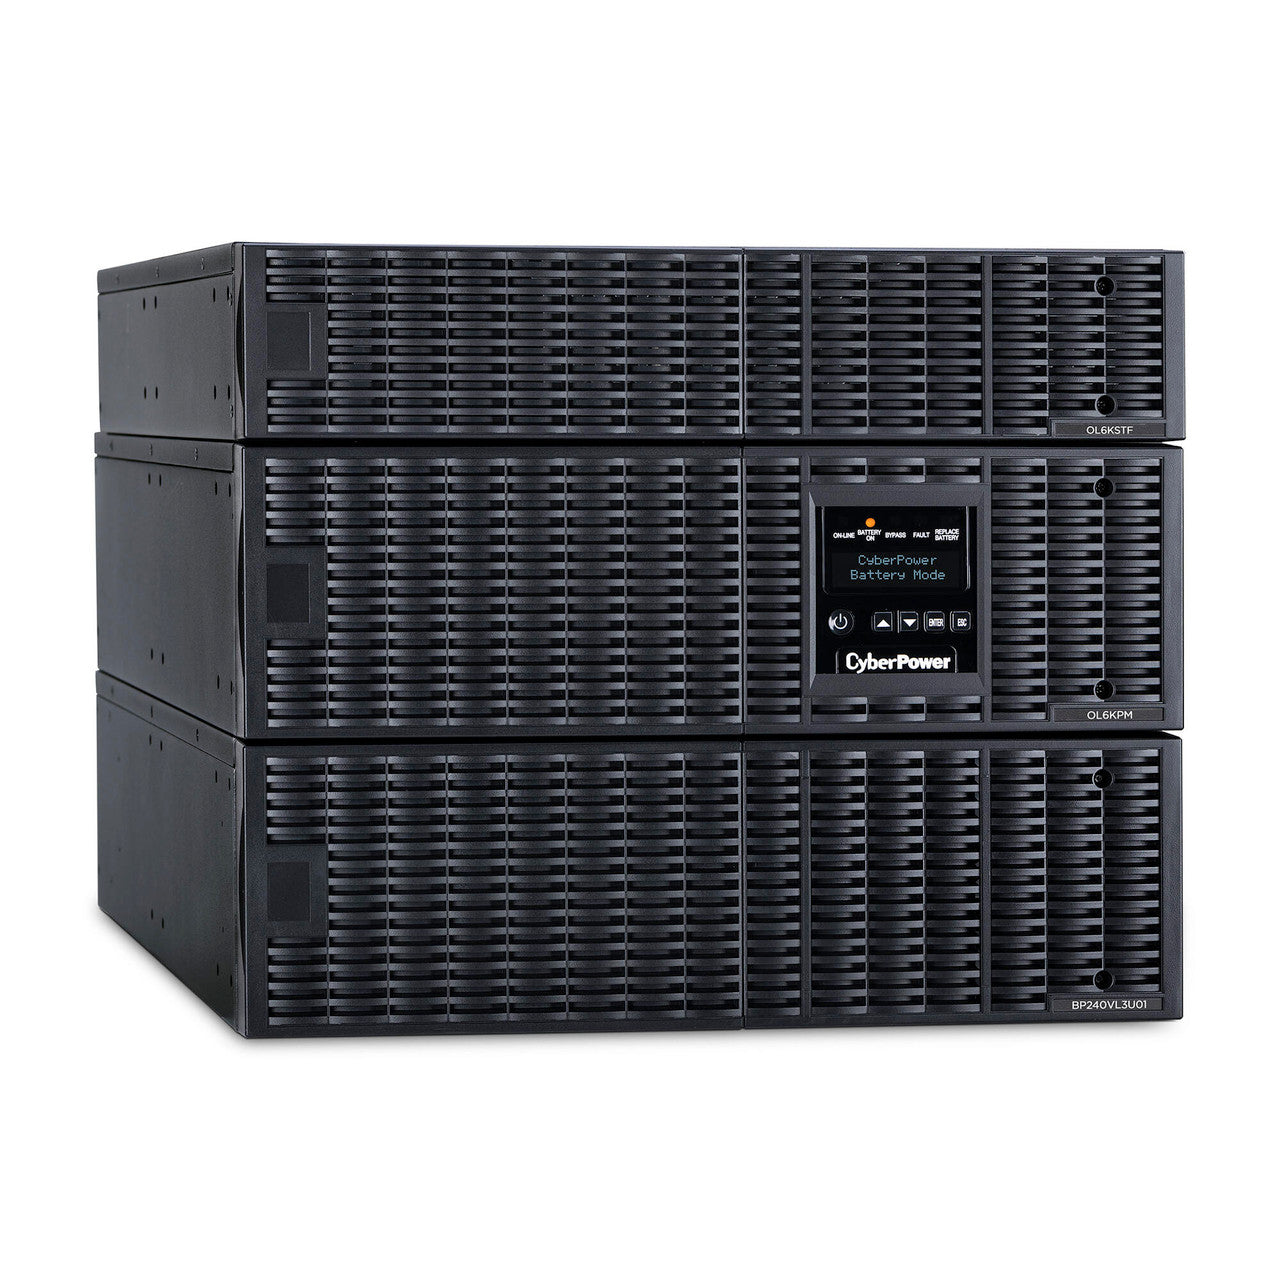 CyberPower OL6KRTF 6KVA/5.4KW, online double-conversion UPS, 6KW step-down transformer included